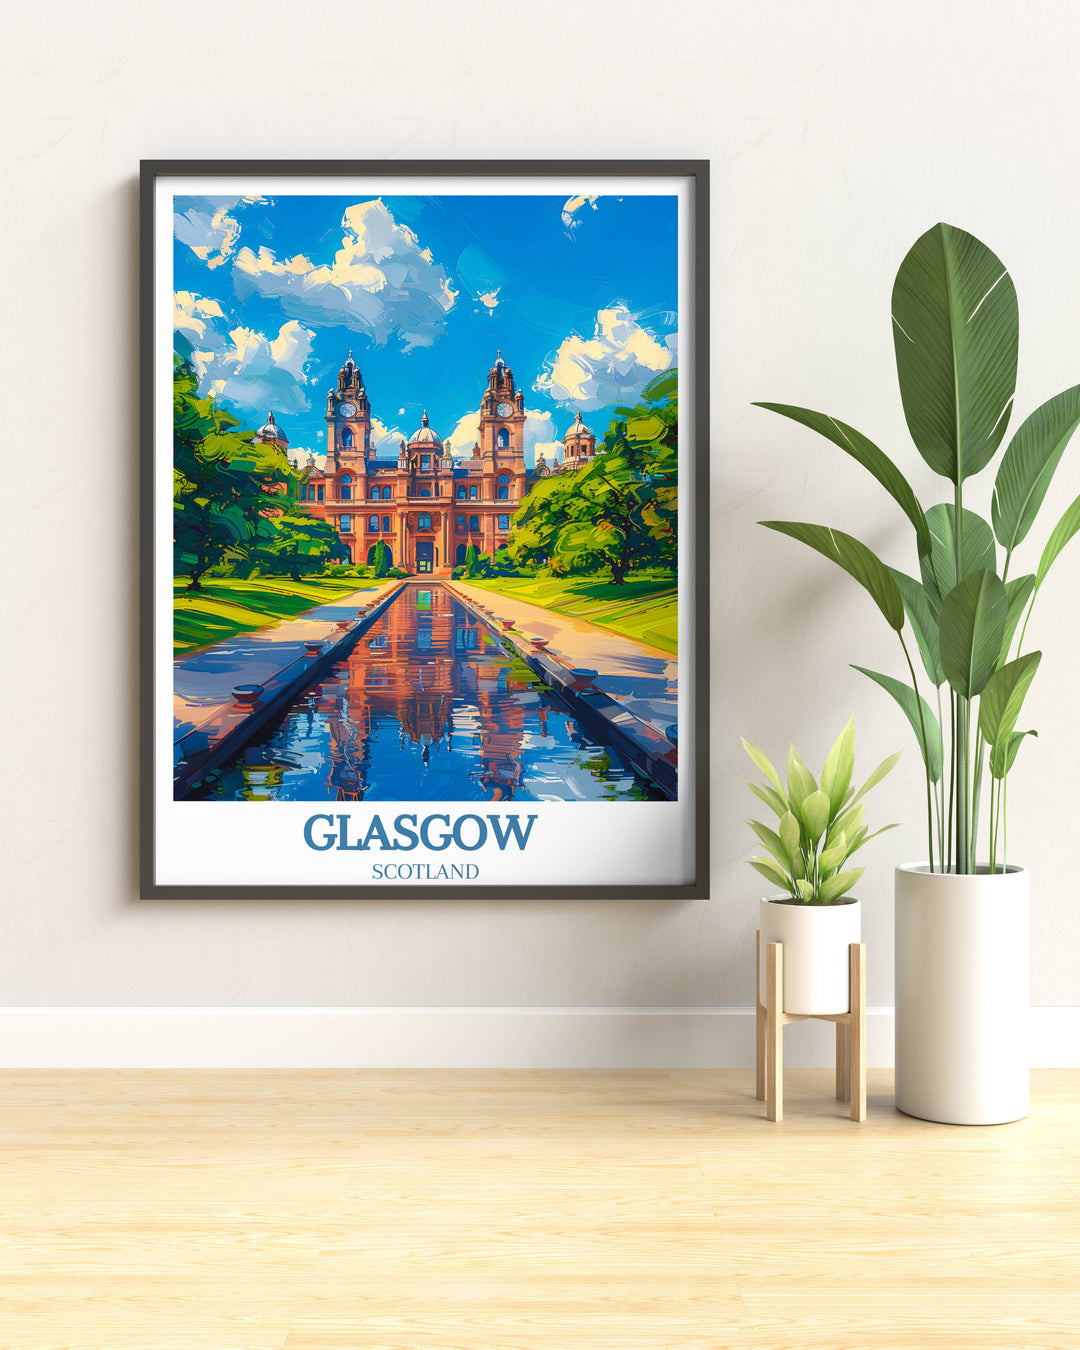 The unique Glasgow print showcases the citys vibrant life and stunning architecture, serving as an elegant piece of travel wall art that brings a piece of Scotland into your living space, ideal for those who appreciate the allure of Glasgows urban landscape